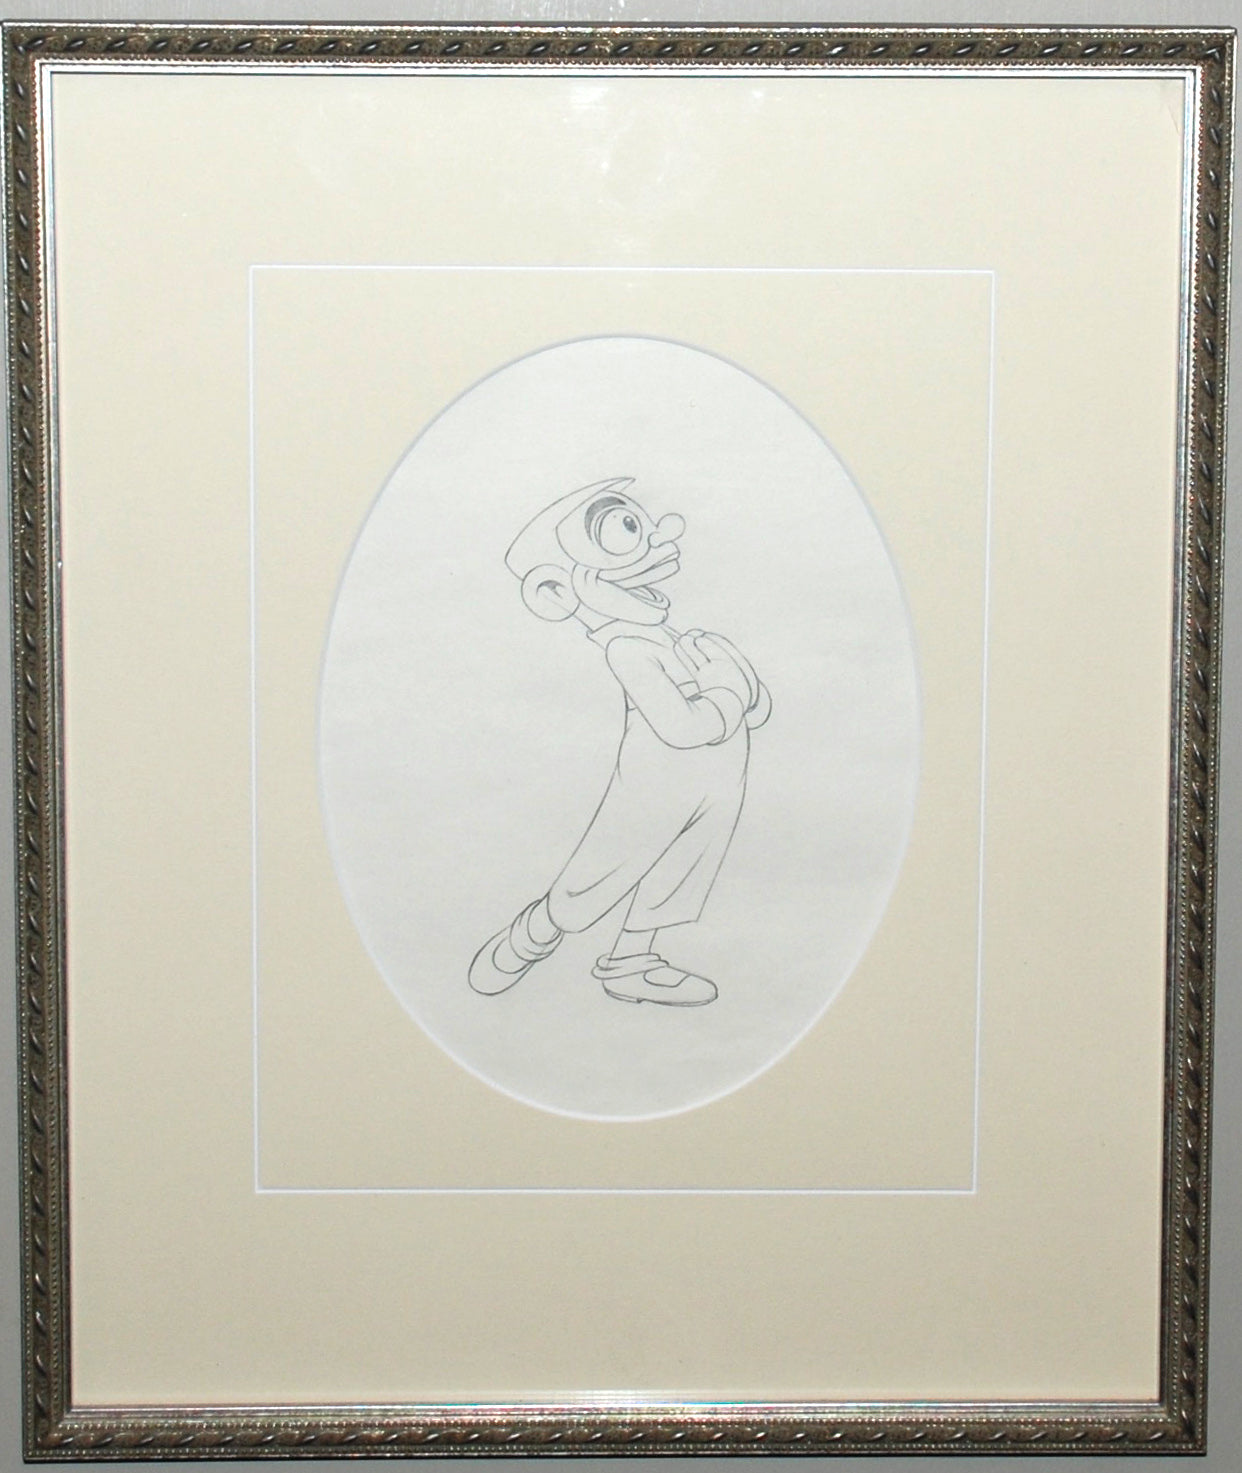 Original Walt Disney Production Drawing from Mother Goose Goes Hollywood featuring Eddie Cantor as Little Jack Horner